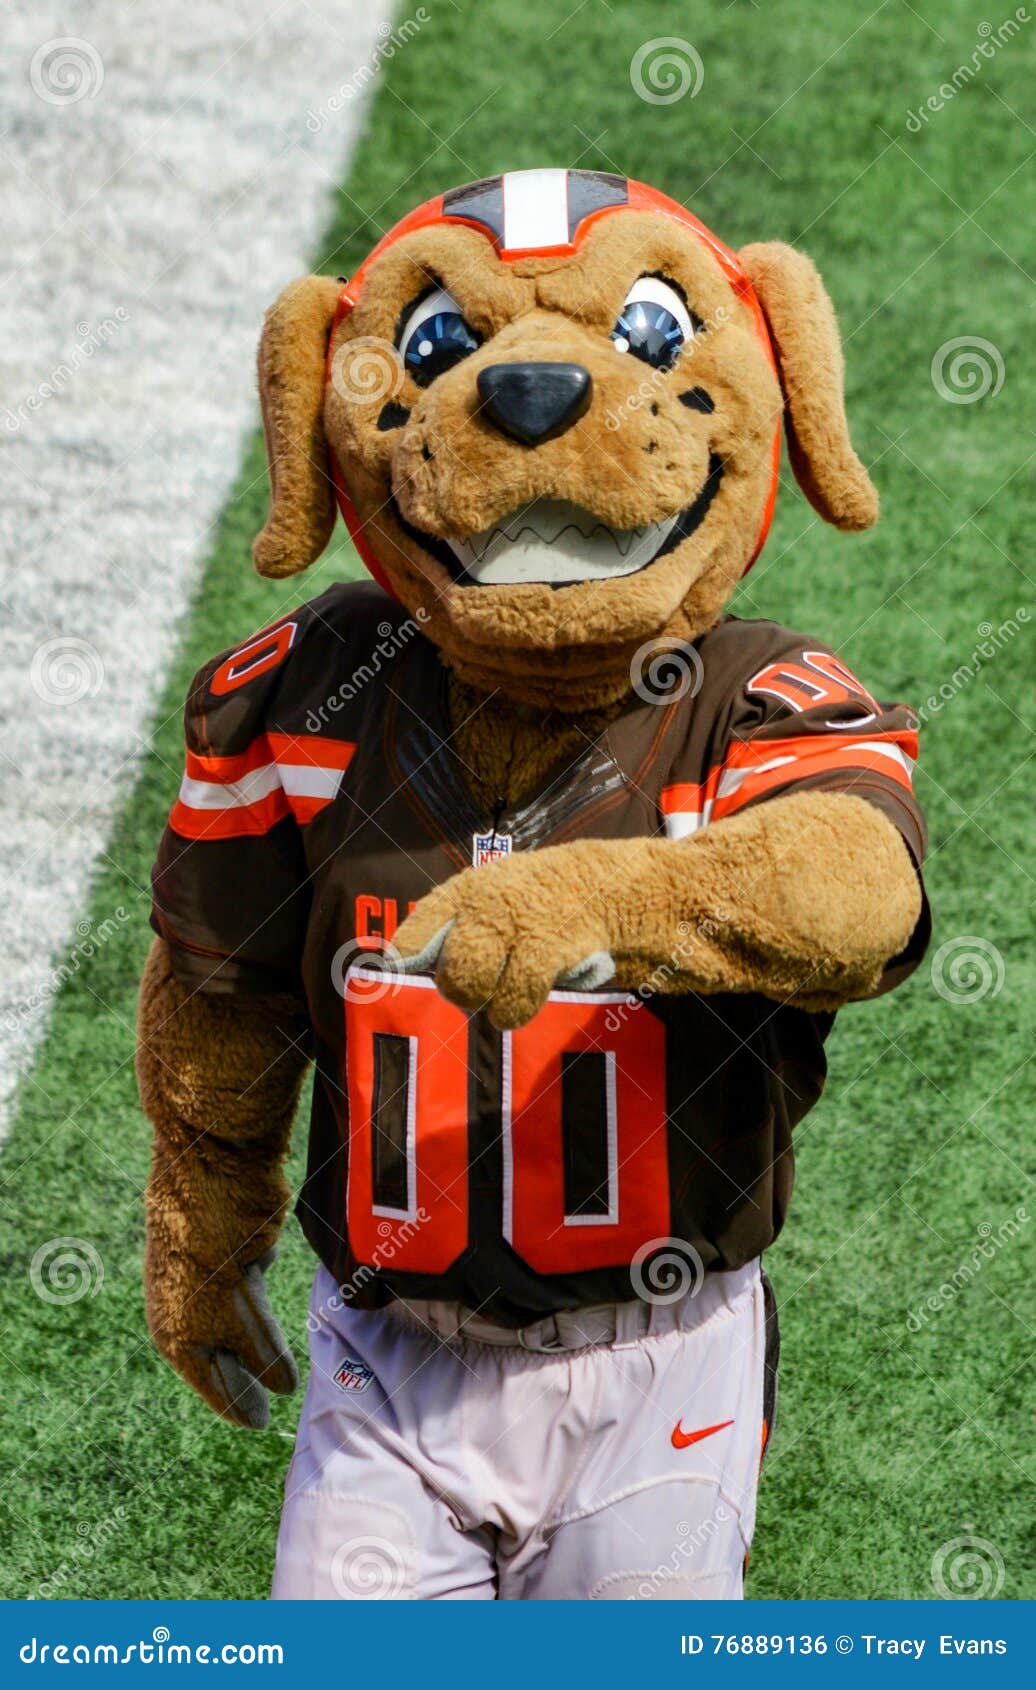 Nfl Mascot Stock Photos - Free & Royalty-Free Stock Photos from Dreamstime